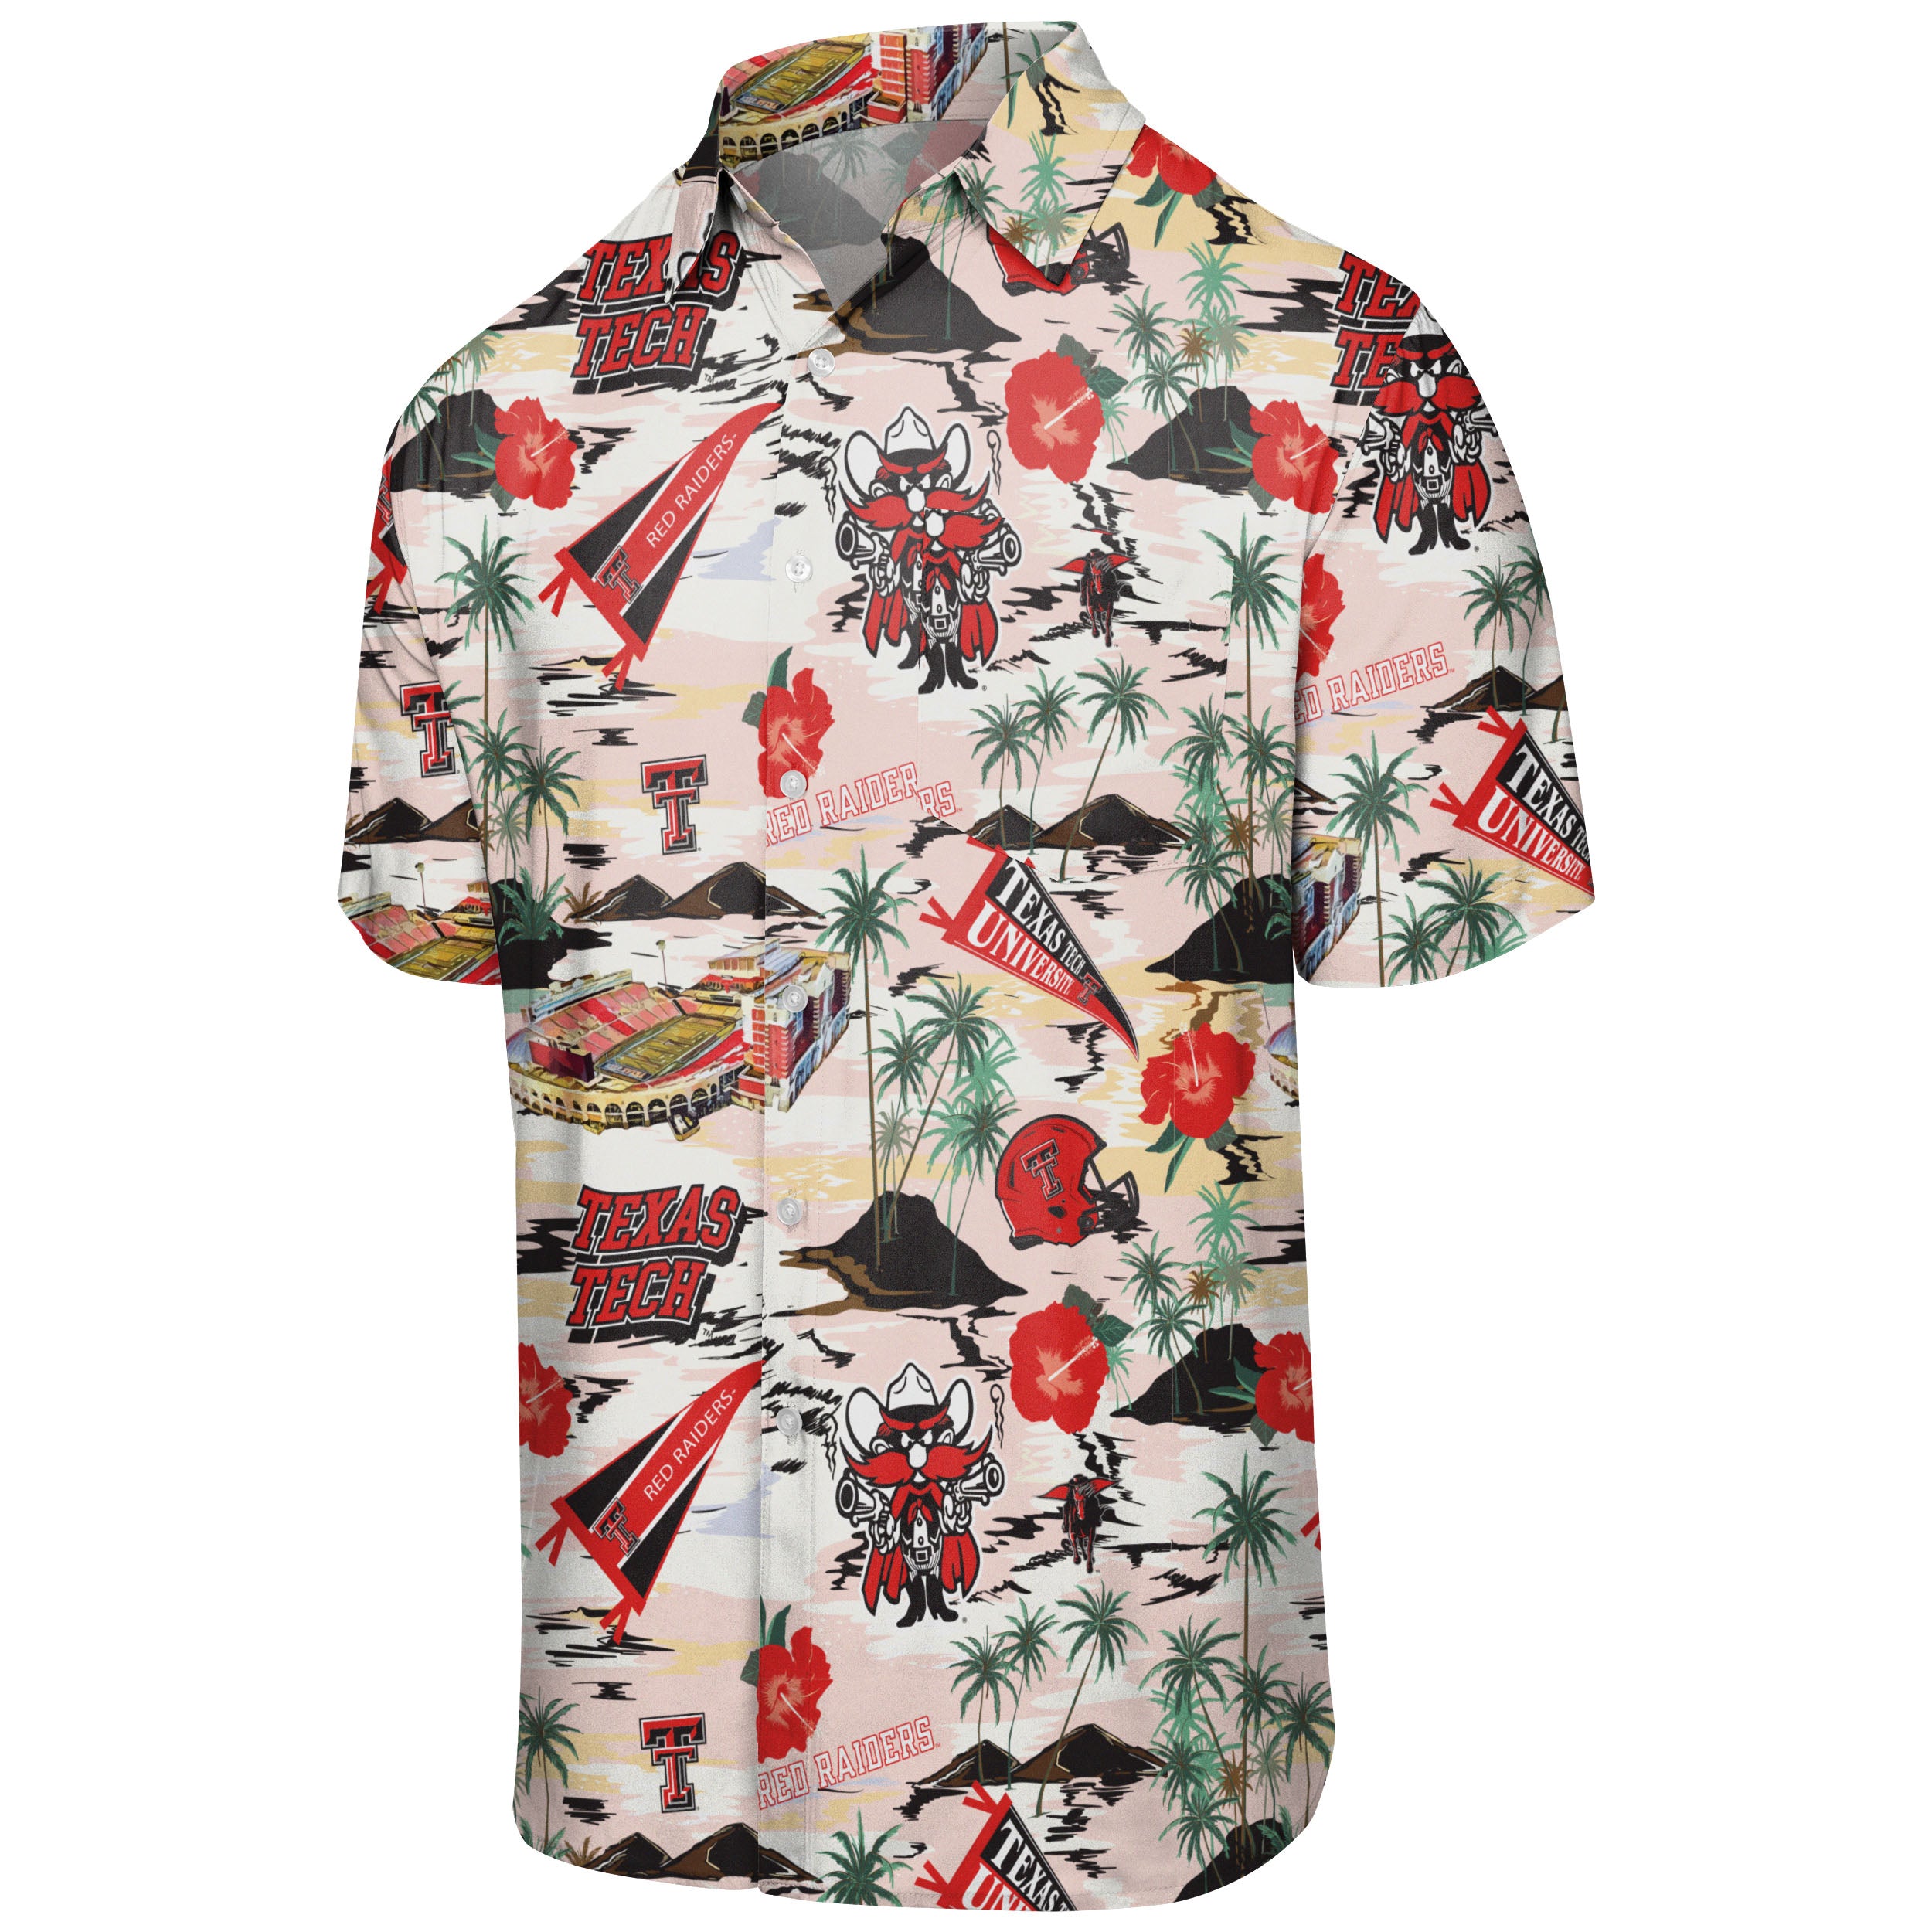 FOCO Texas Tech Thematic Stadium Hawaiian Button Down Shirt, Size: 2X, Sold by Red Raider Outfitters